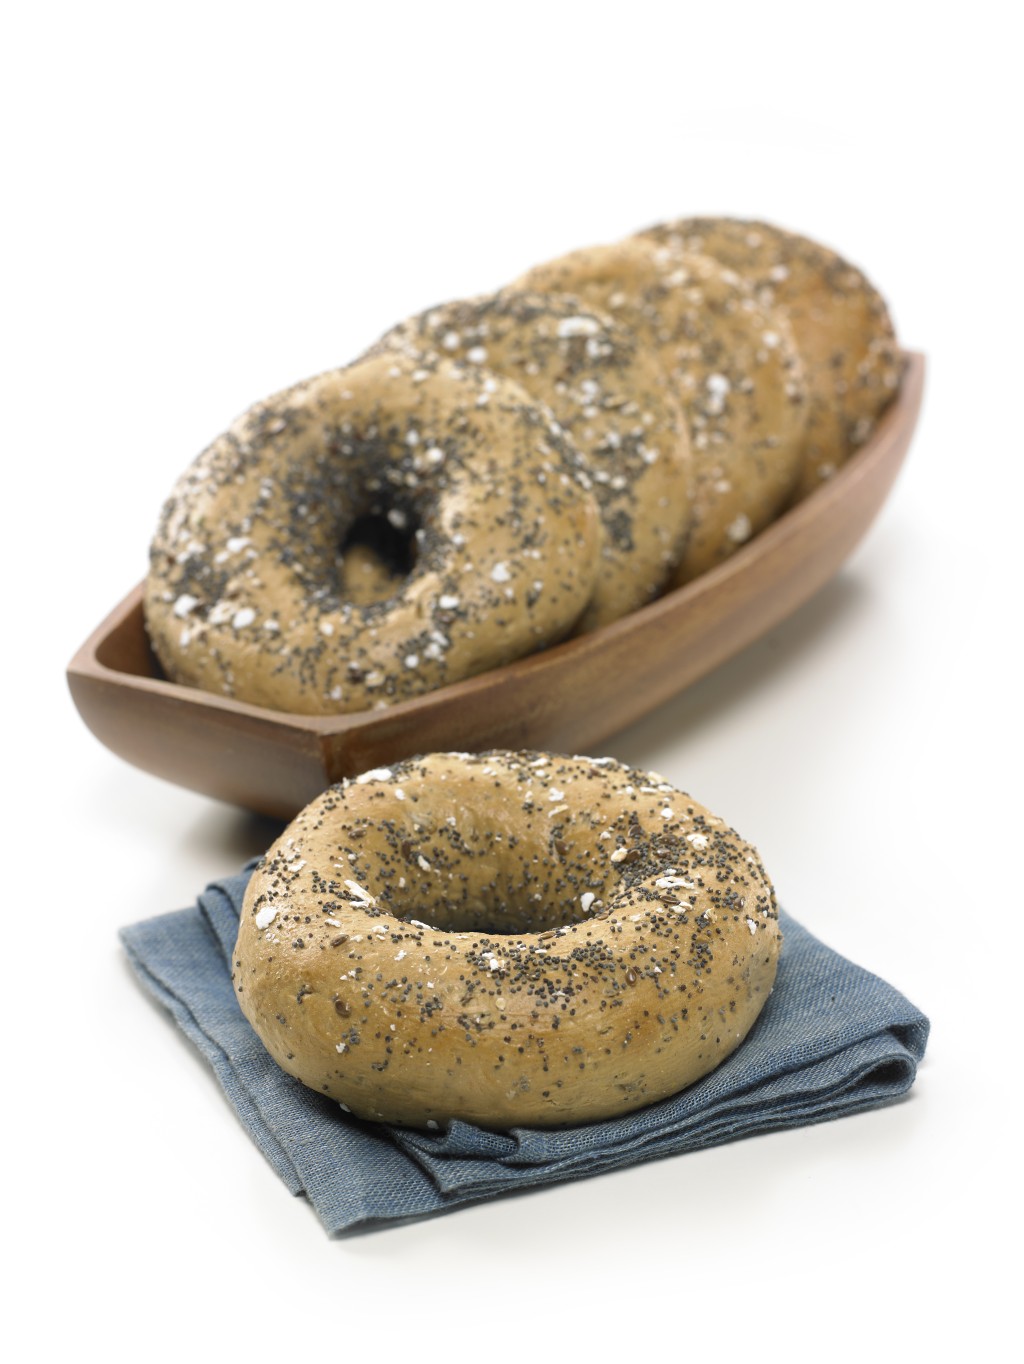 Fully Baked Multiseed Bagels